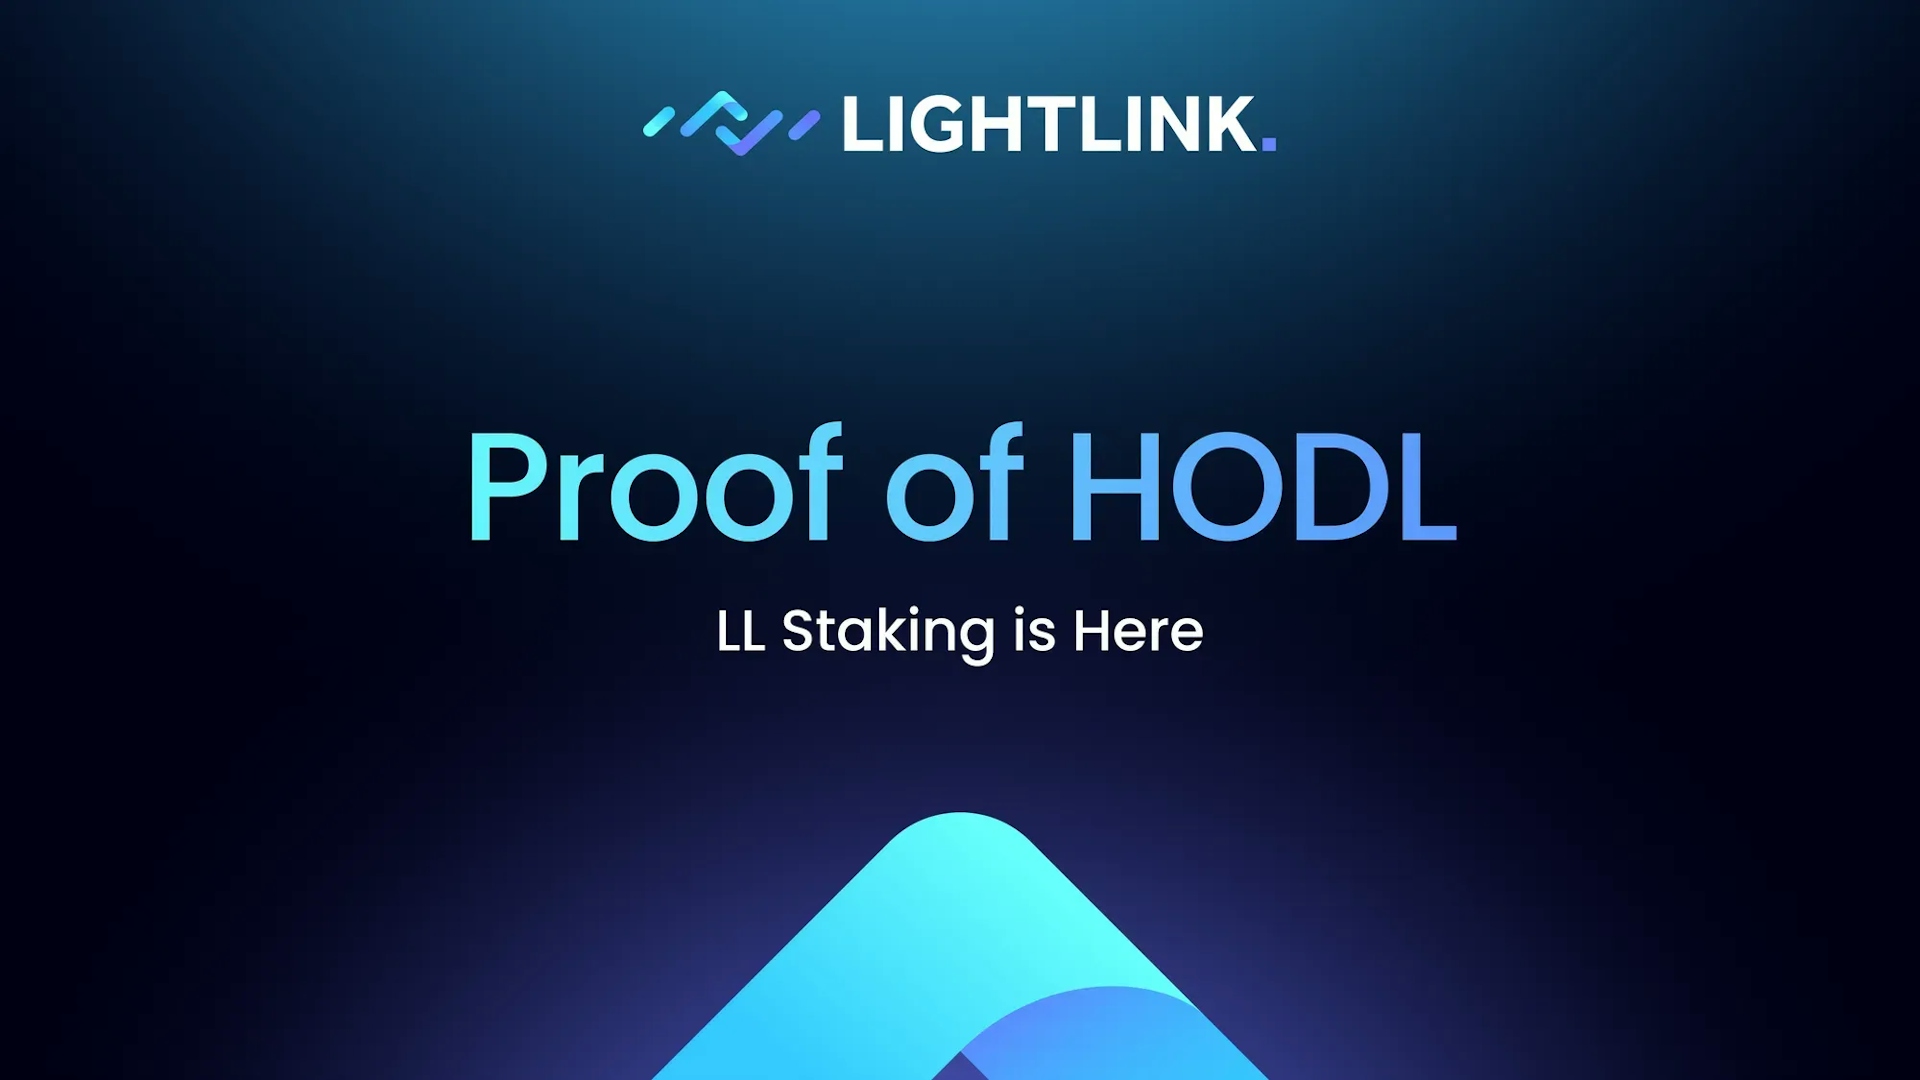 LightLink Launches Proof of HODL: Stake, Earn, and Prepare for Validator Nodes